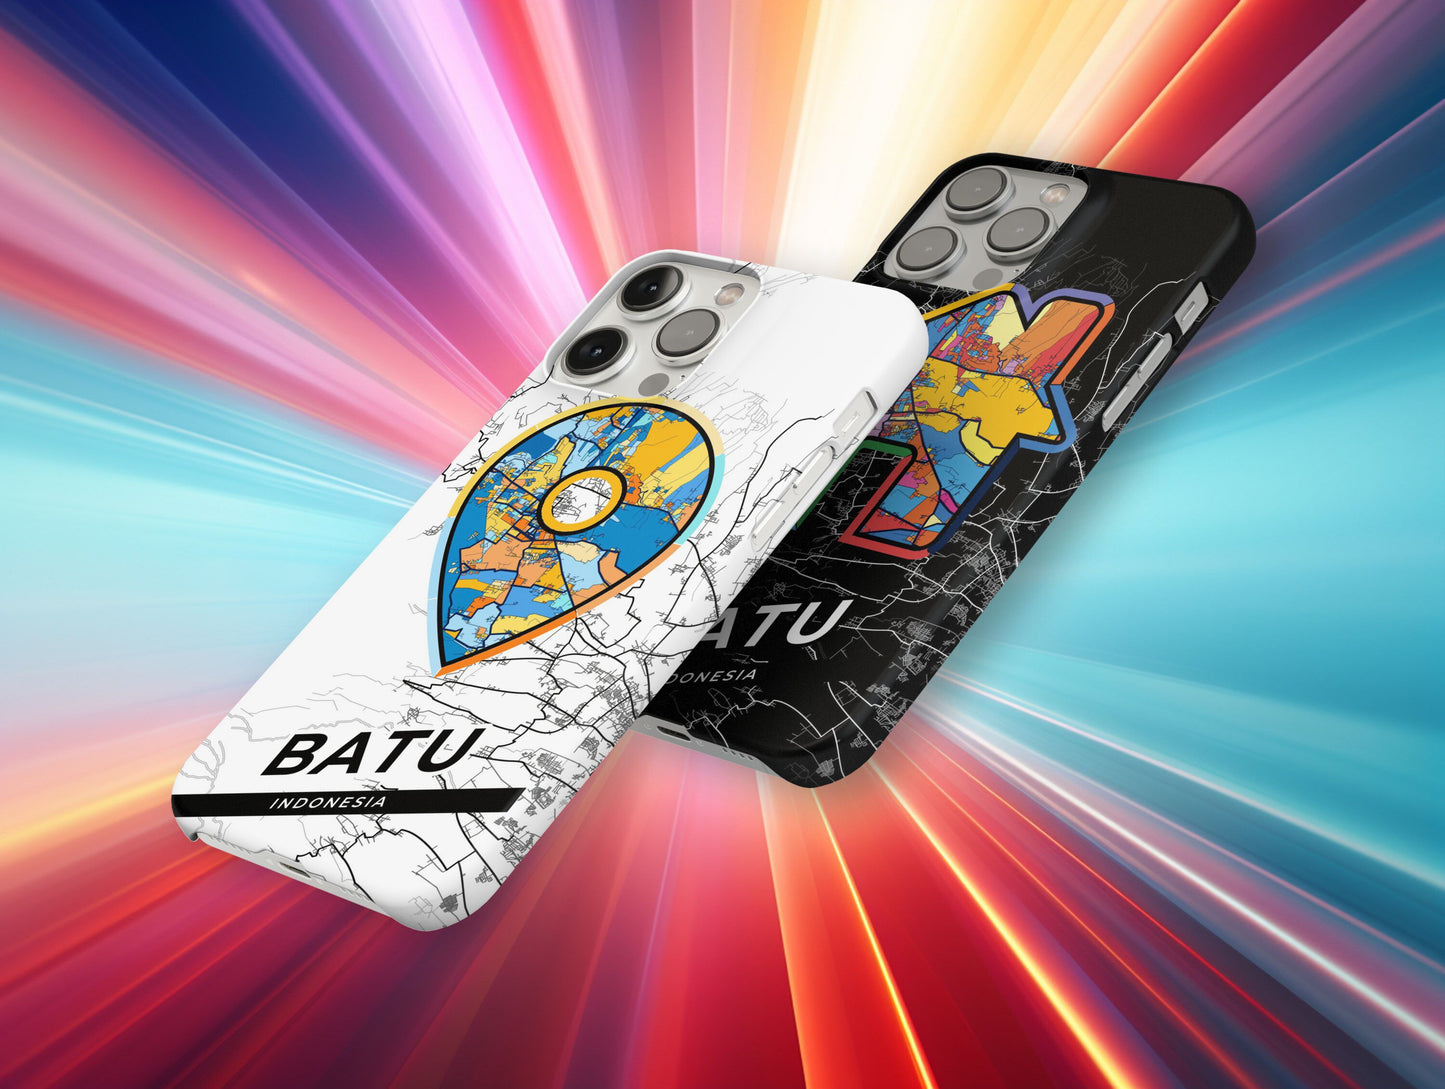 Batu Indonesia slim phone case with colorful icon. Birthday, wedding or housewarming gift. Couple match cases.